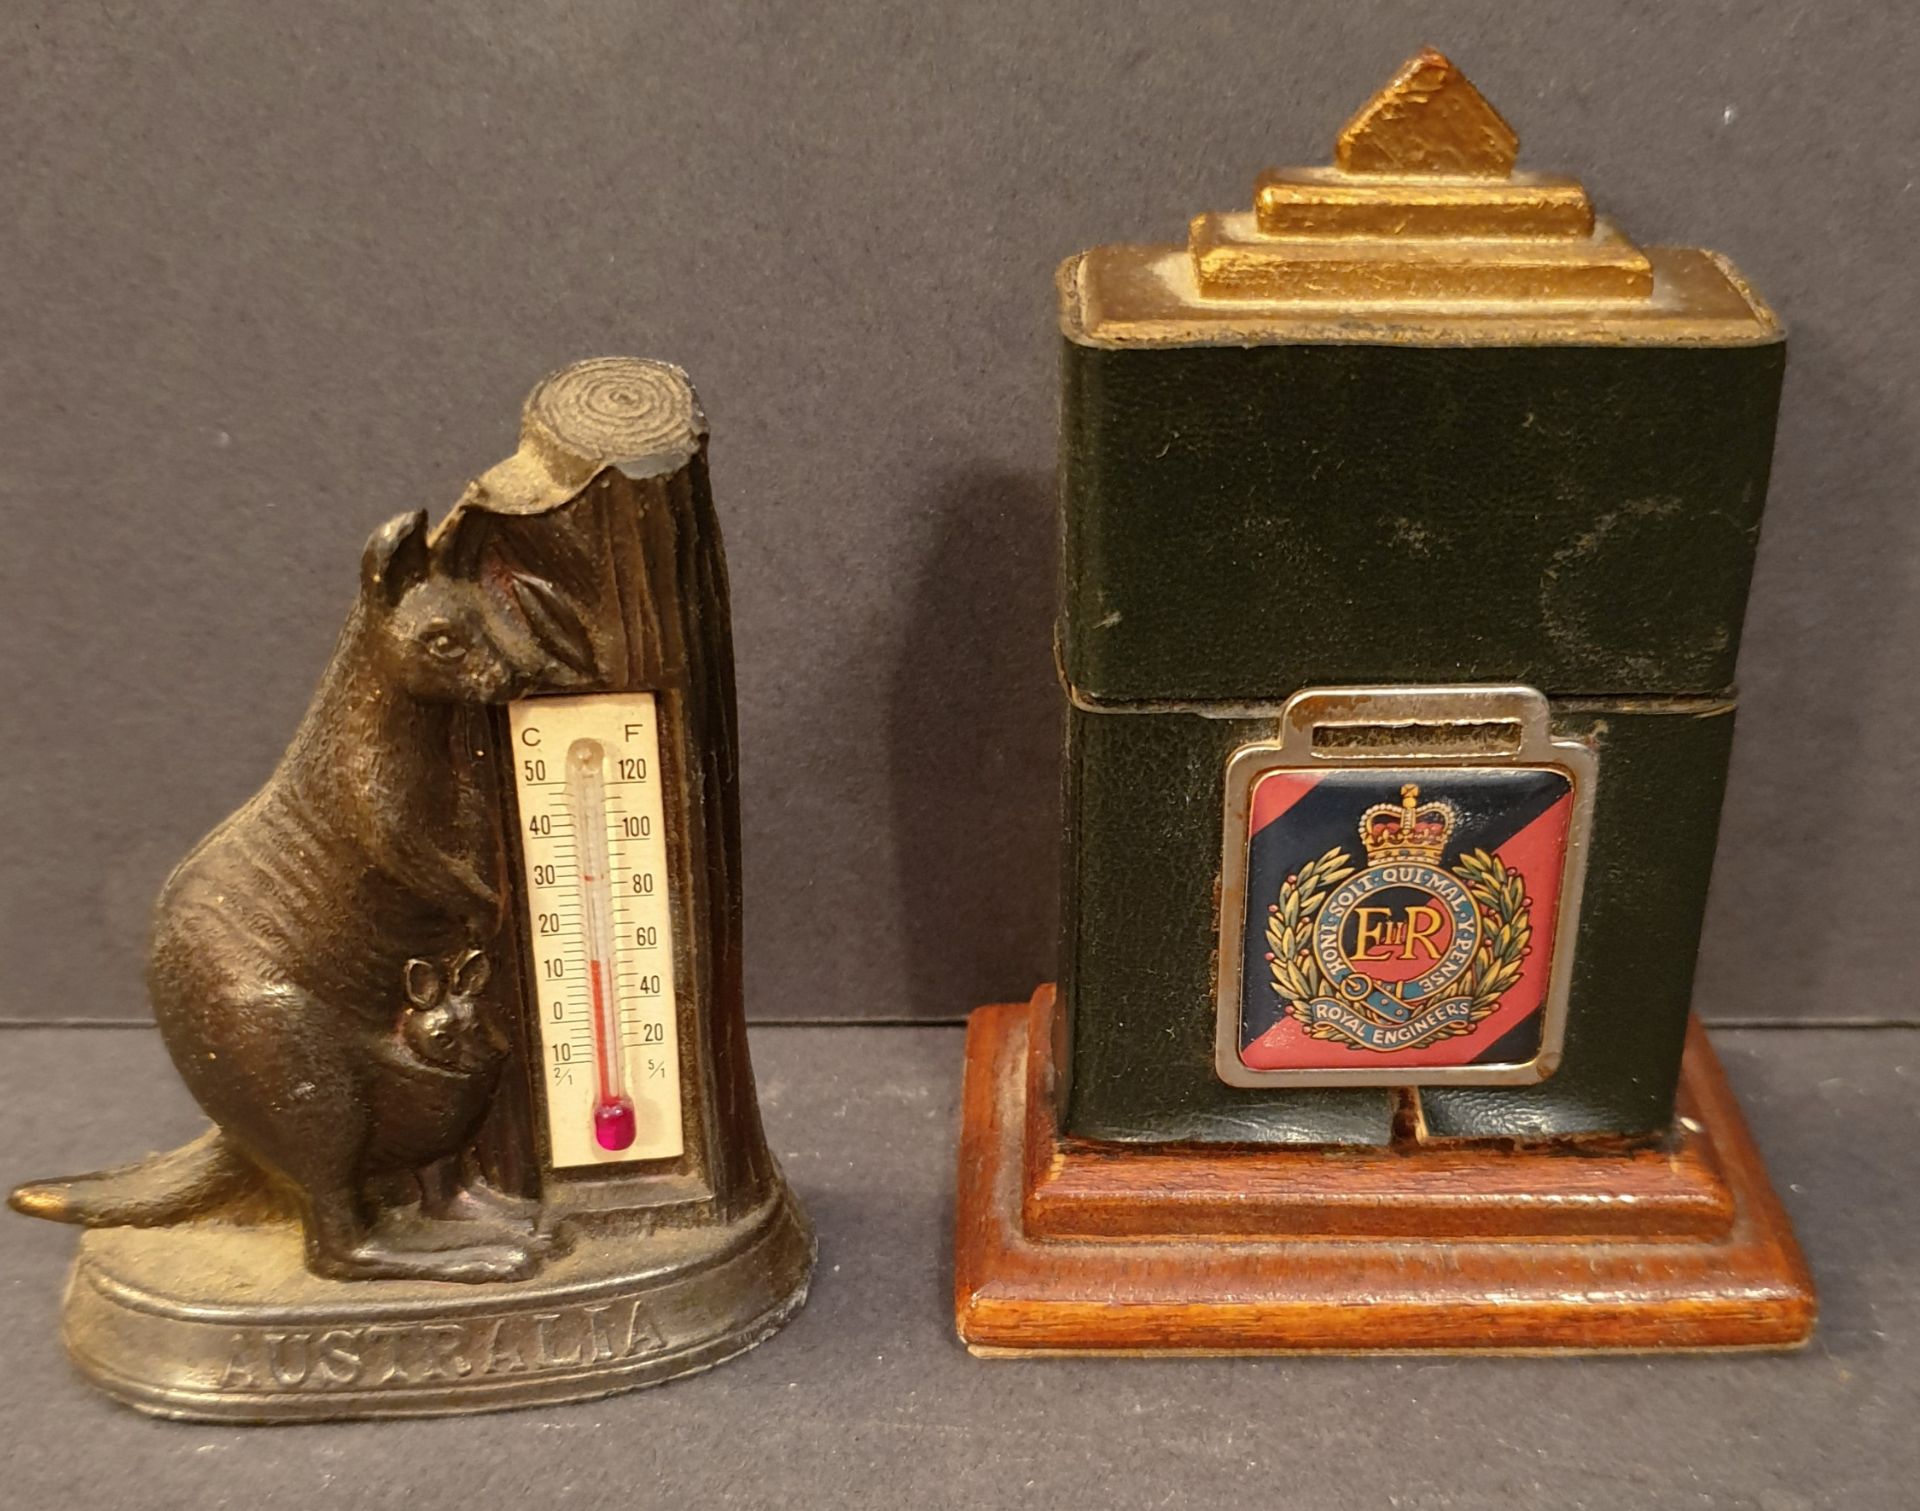 Vintage Zippo Lighter In Military Related Box Plus Brass Kangaroo Thermometer